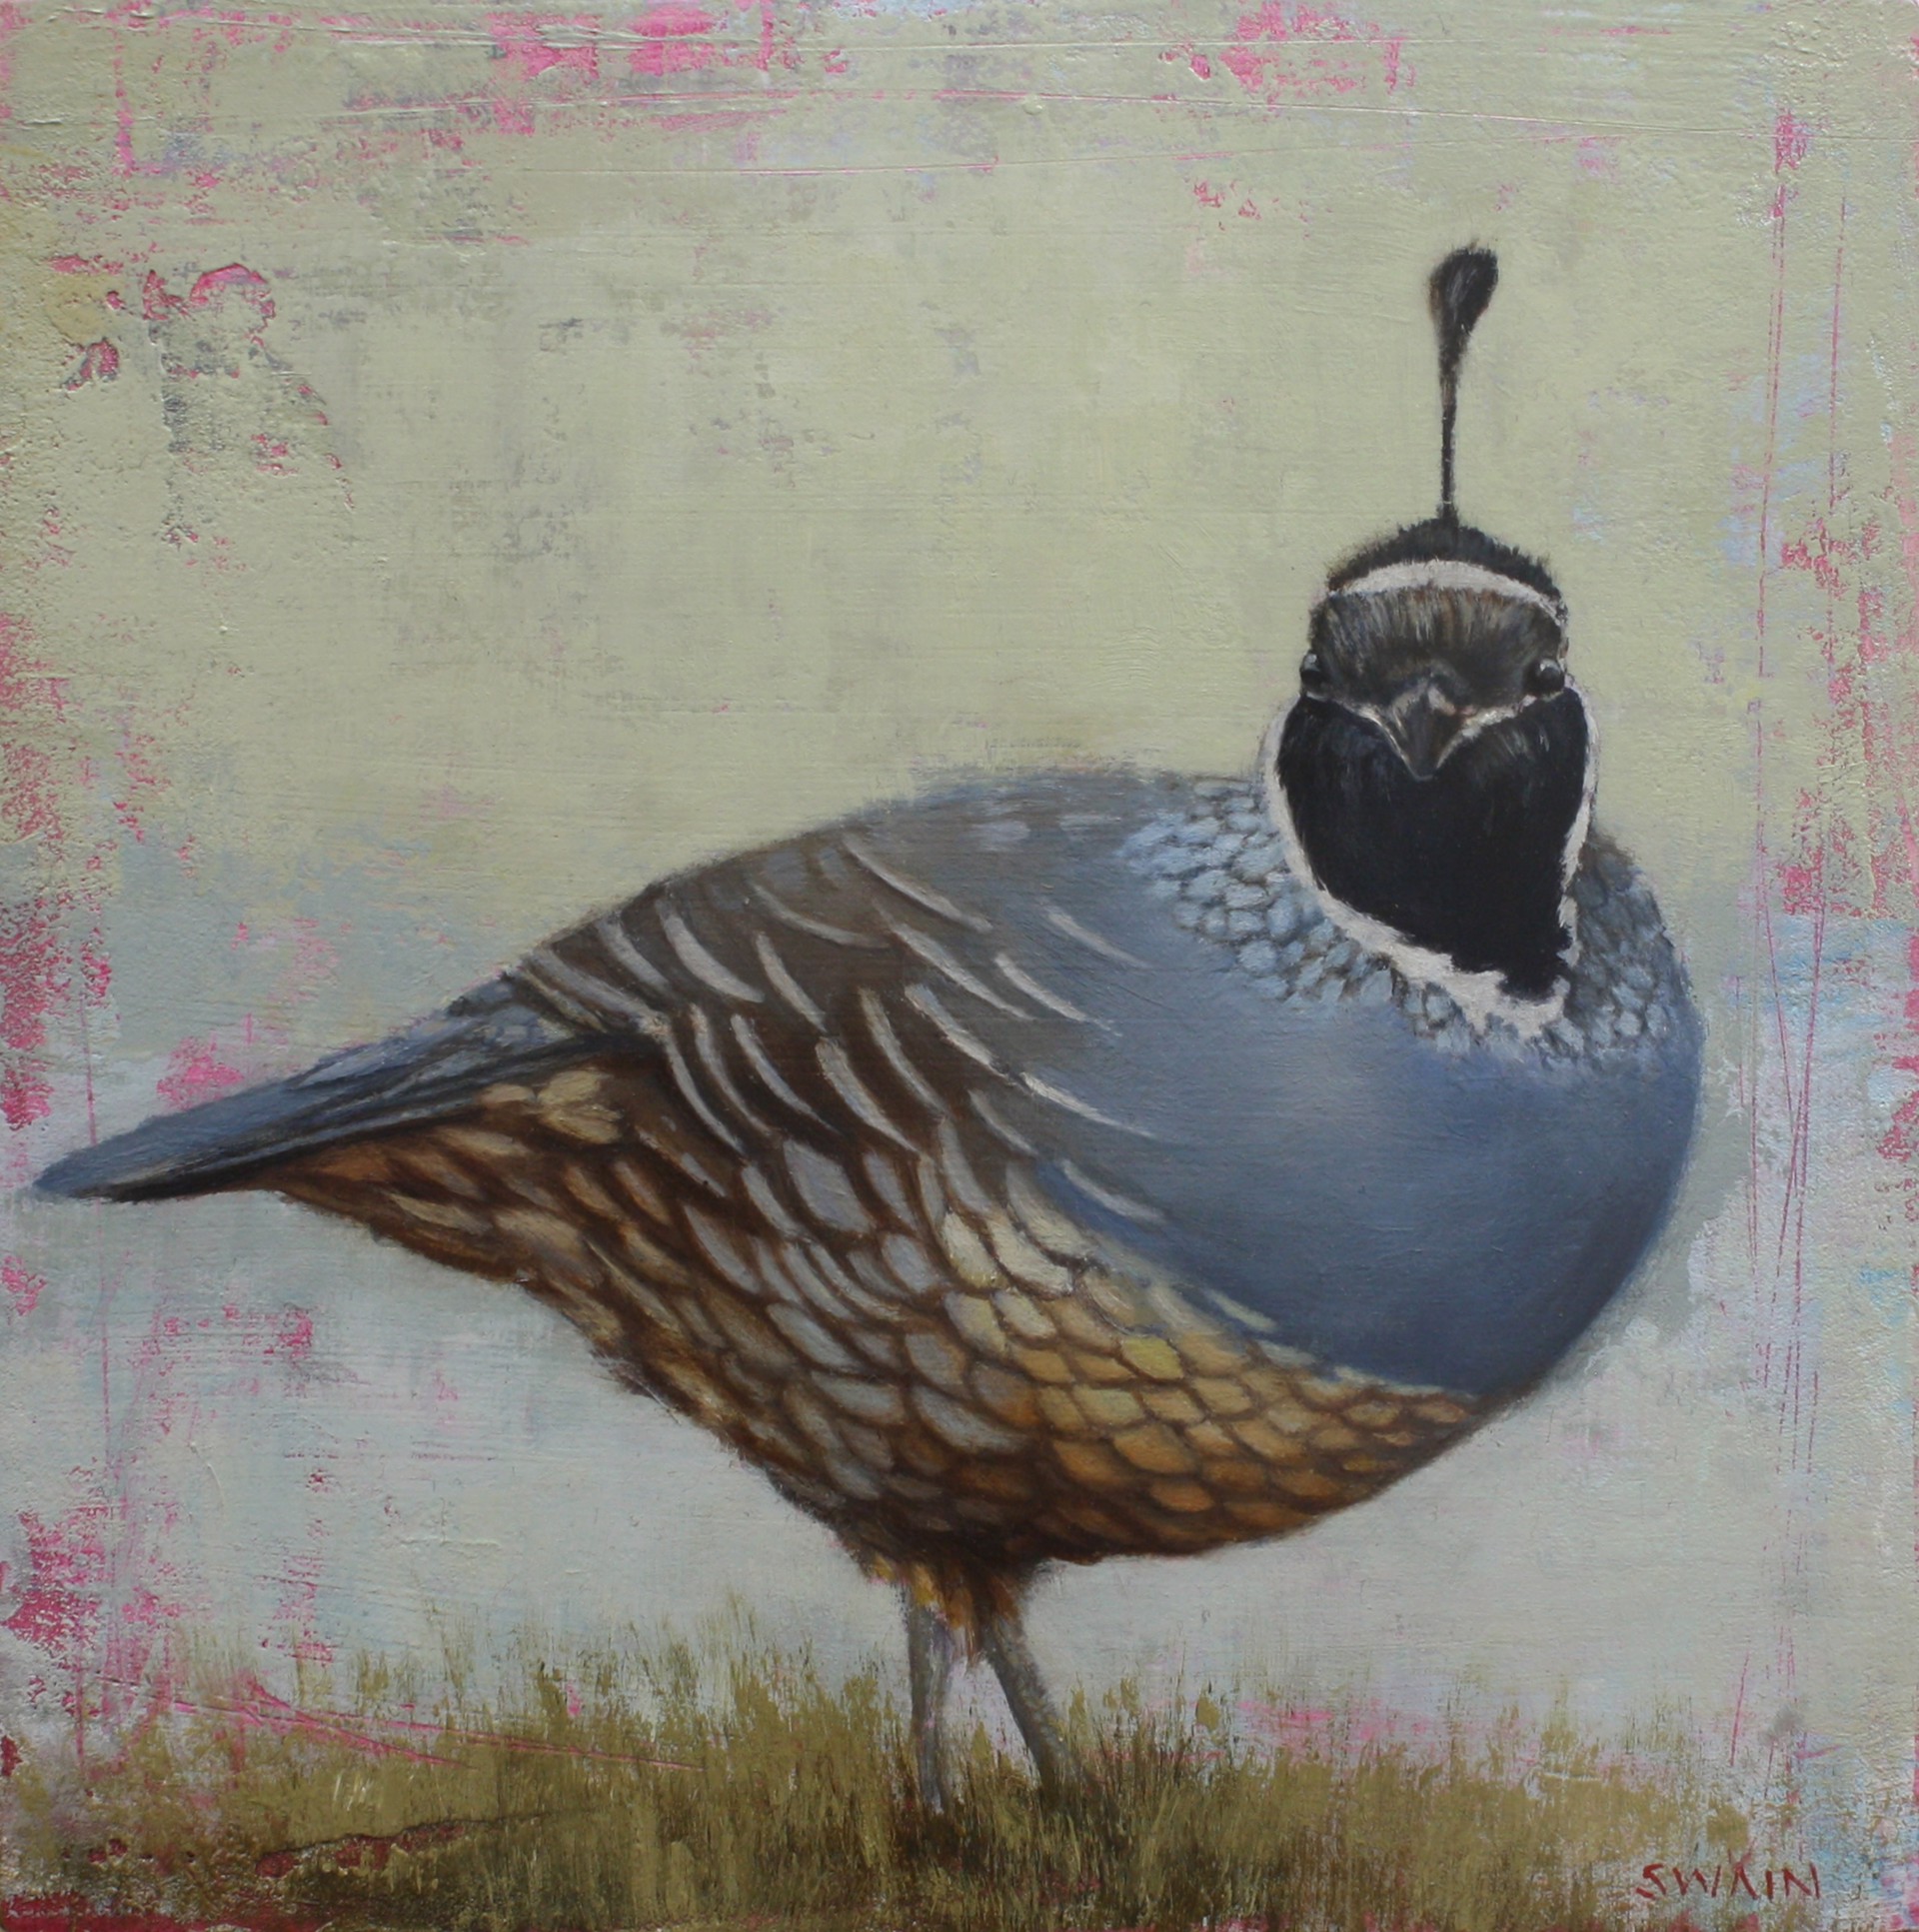 Quizzical Quail by Tyler Swain